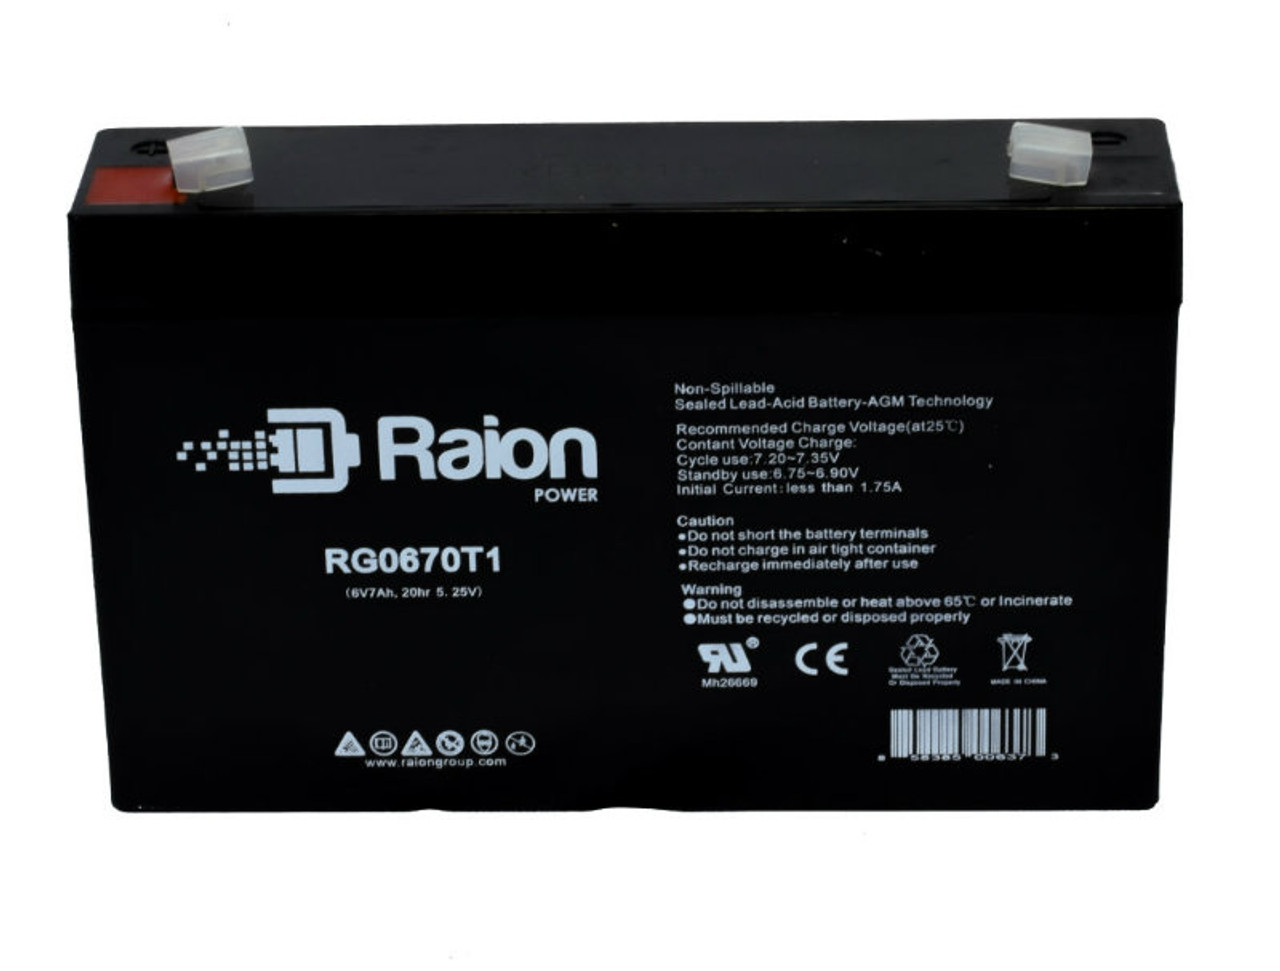 Raion Power RG0670T1 Replacement Battery Cartridge for Medical Research Lab ECG MONITOR